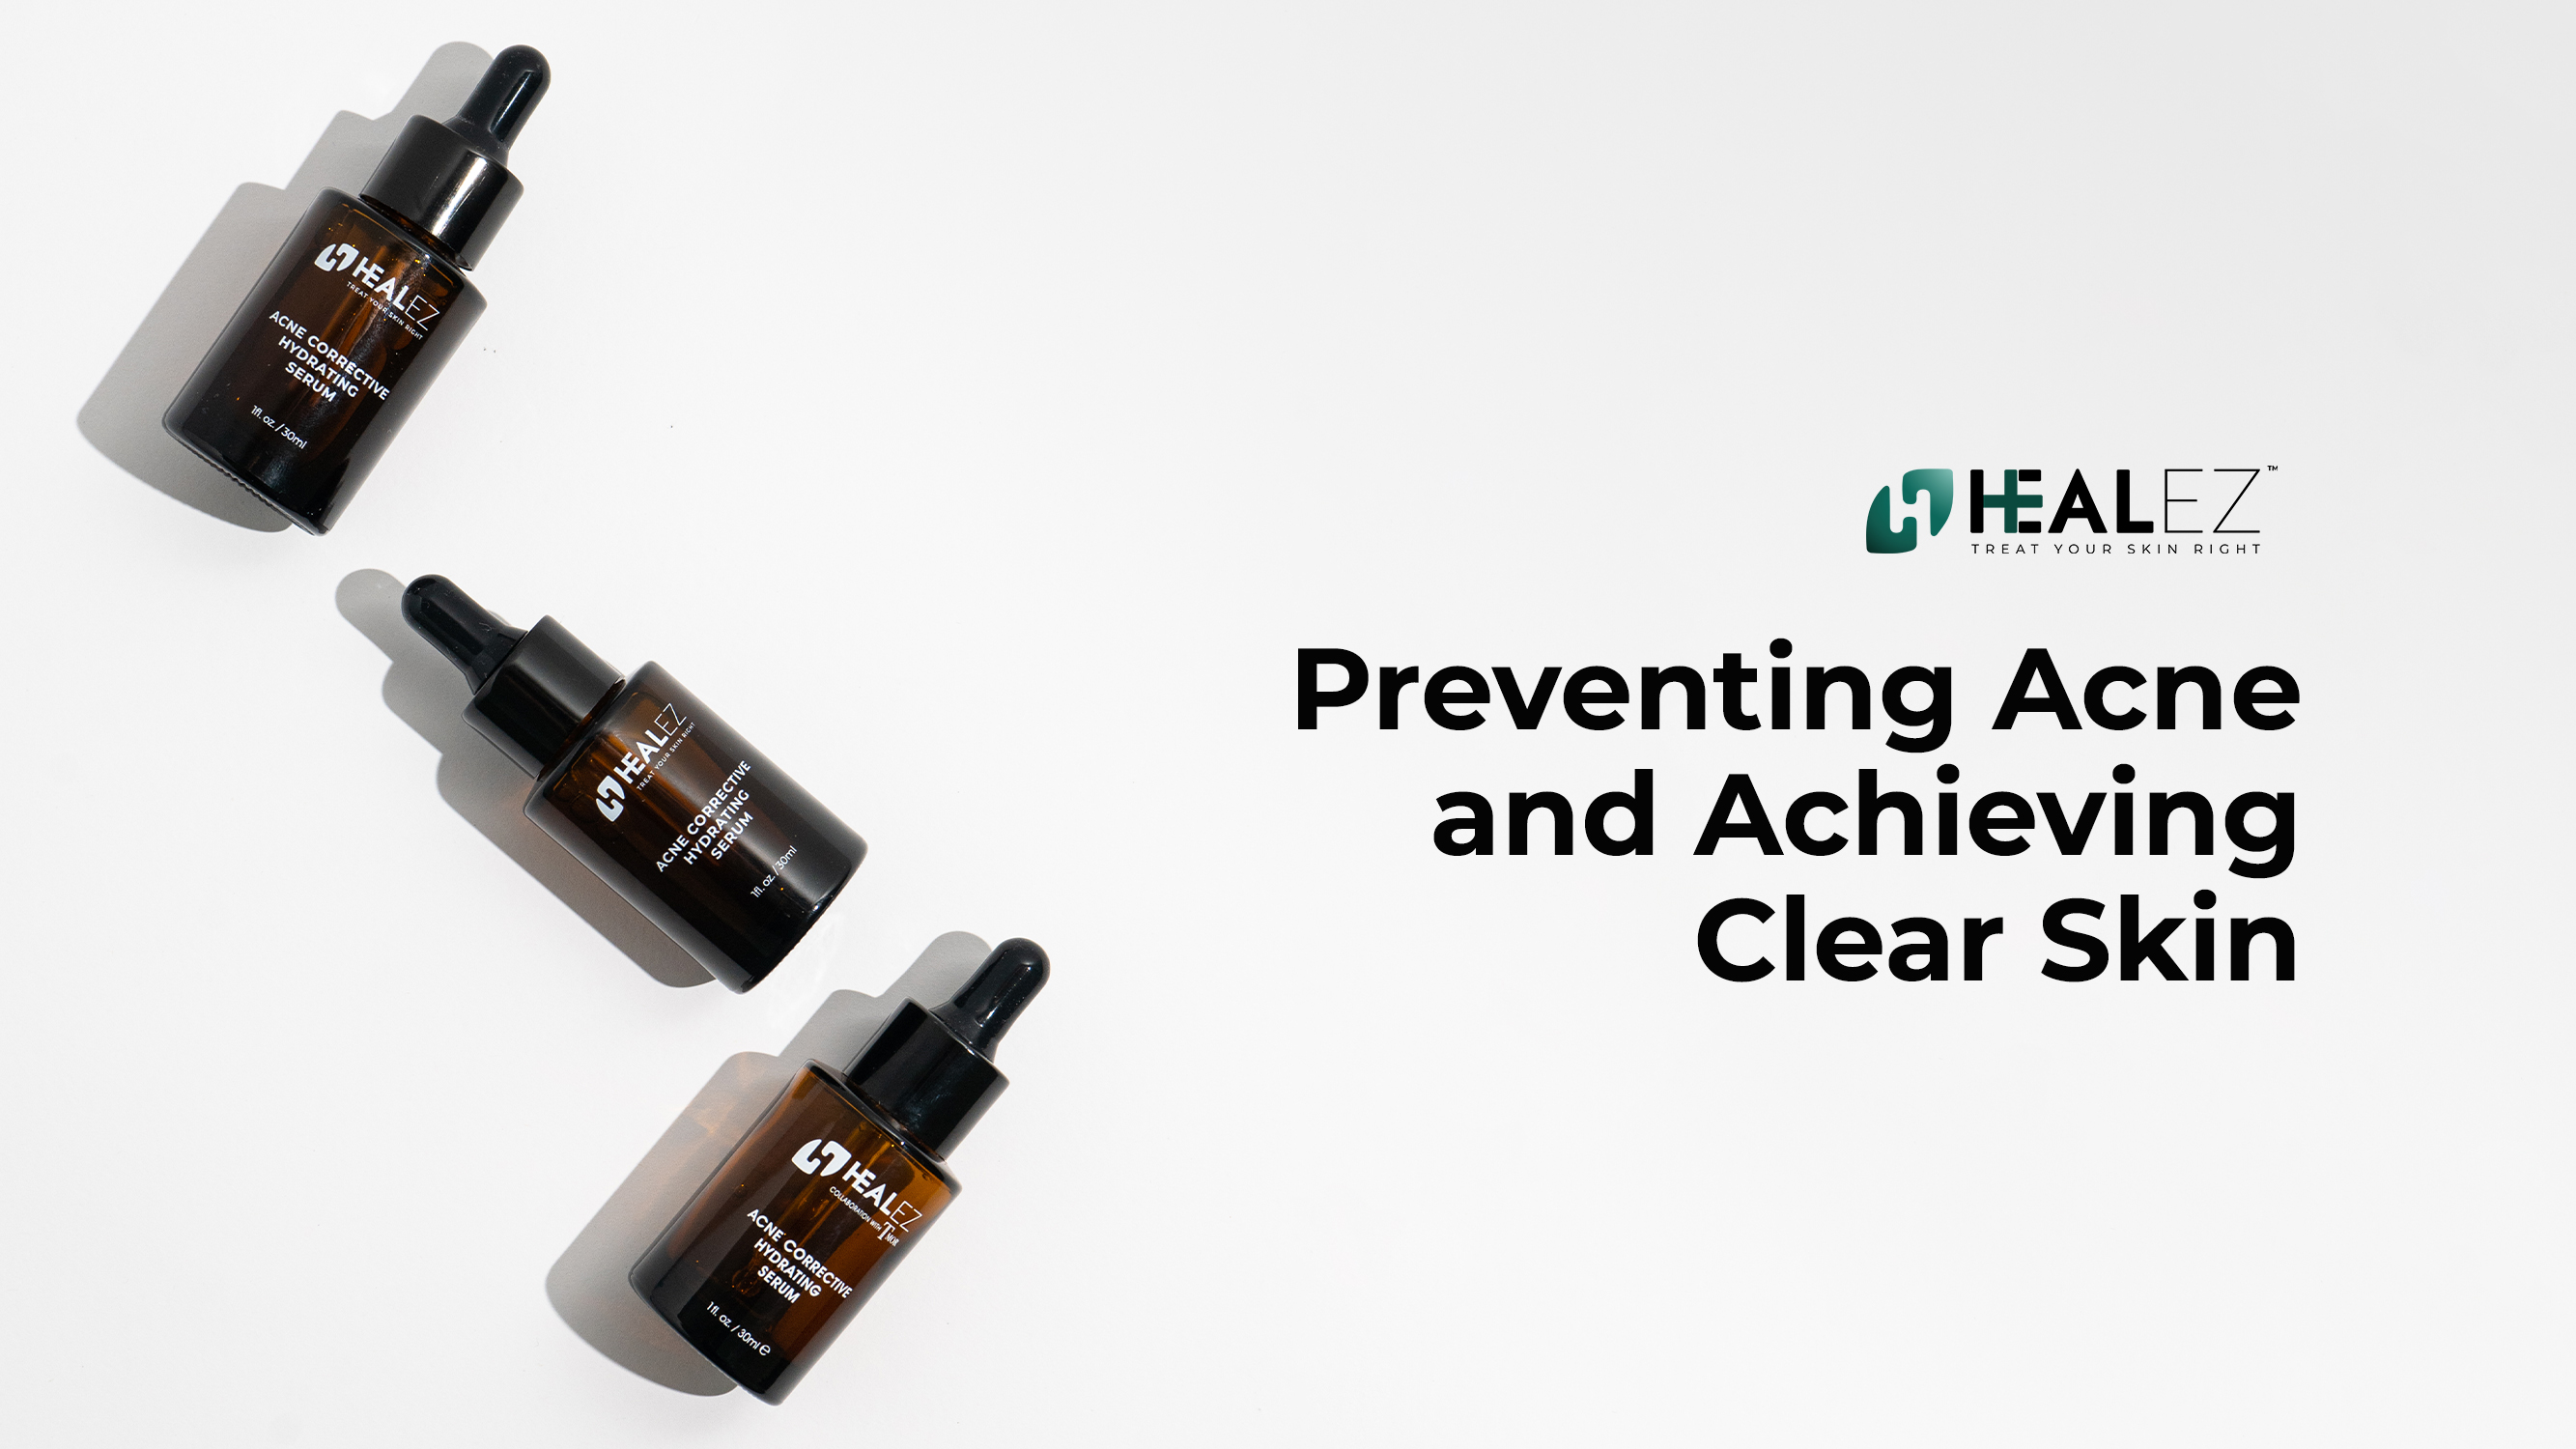 Preventing Acne and Achieving Clear Skin